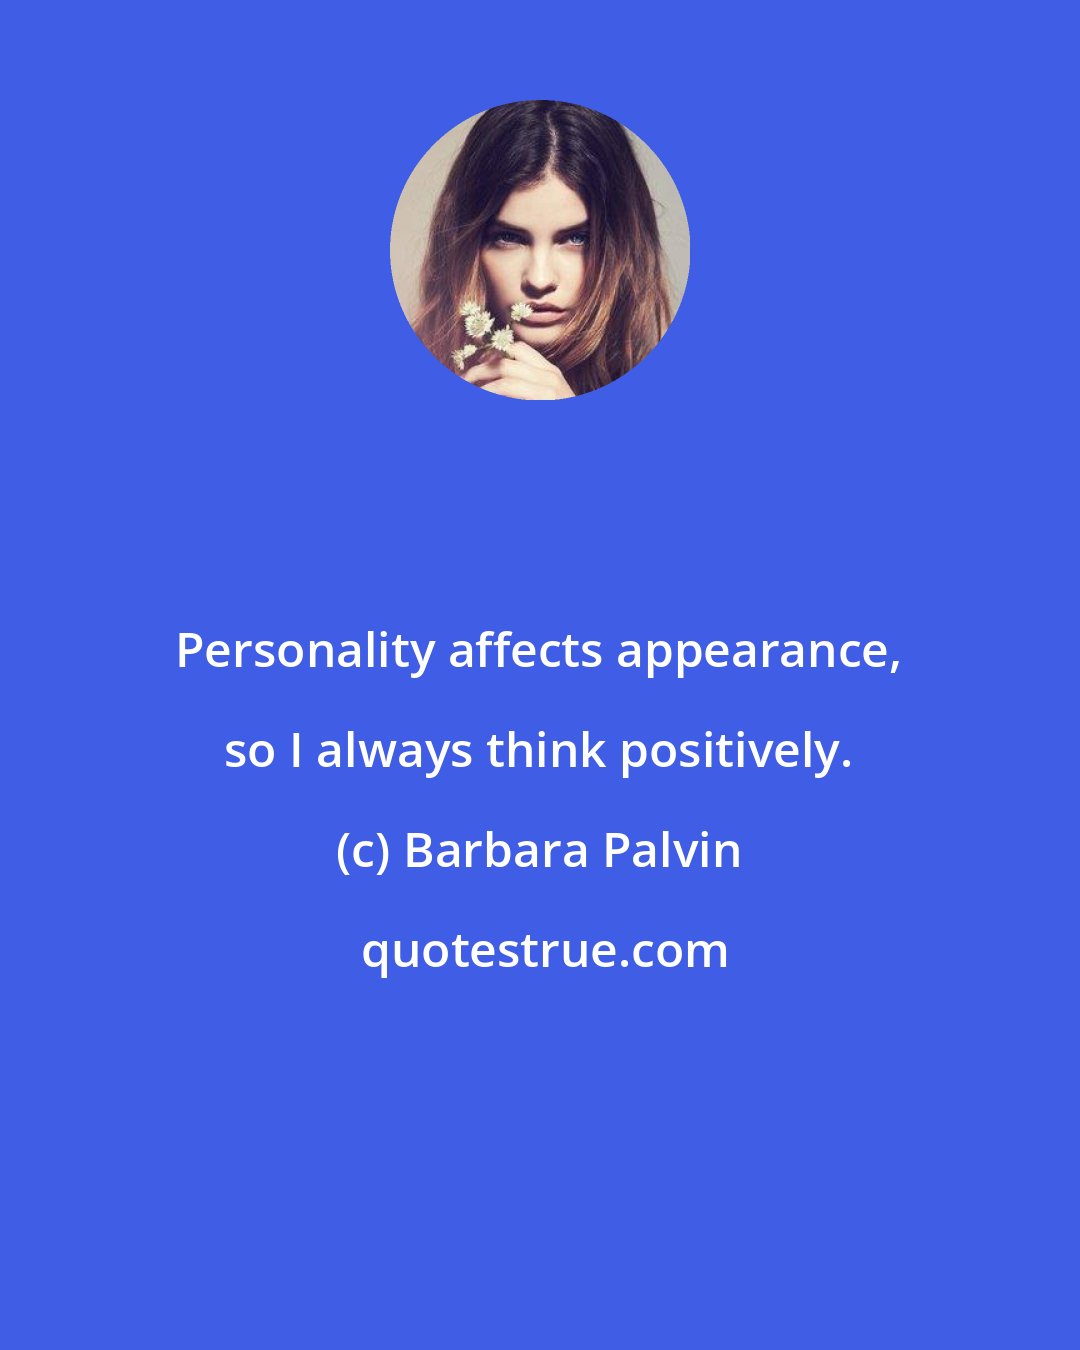 Barbara Palvin: Personality affects appearance, so I always think positively.